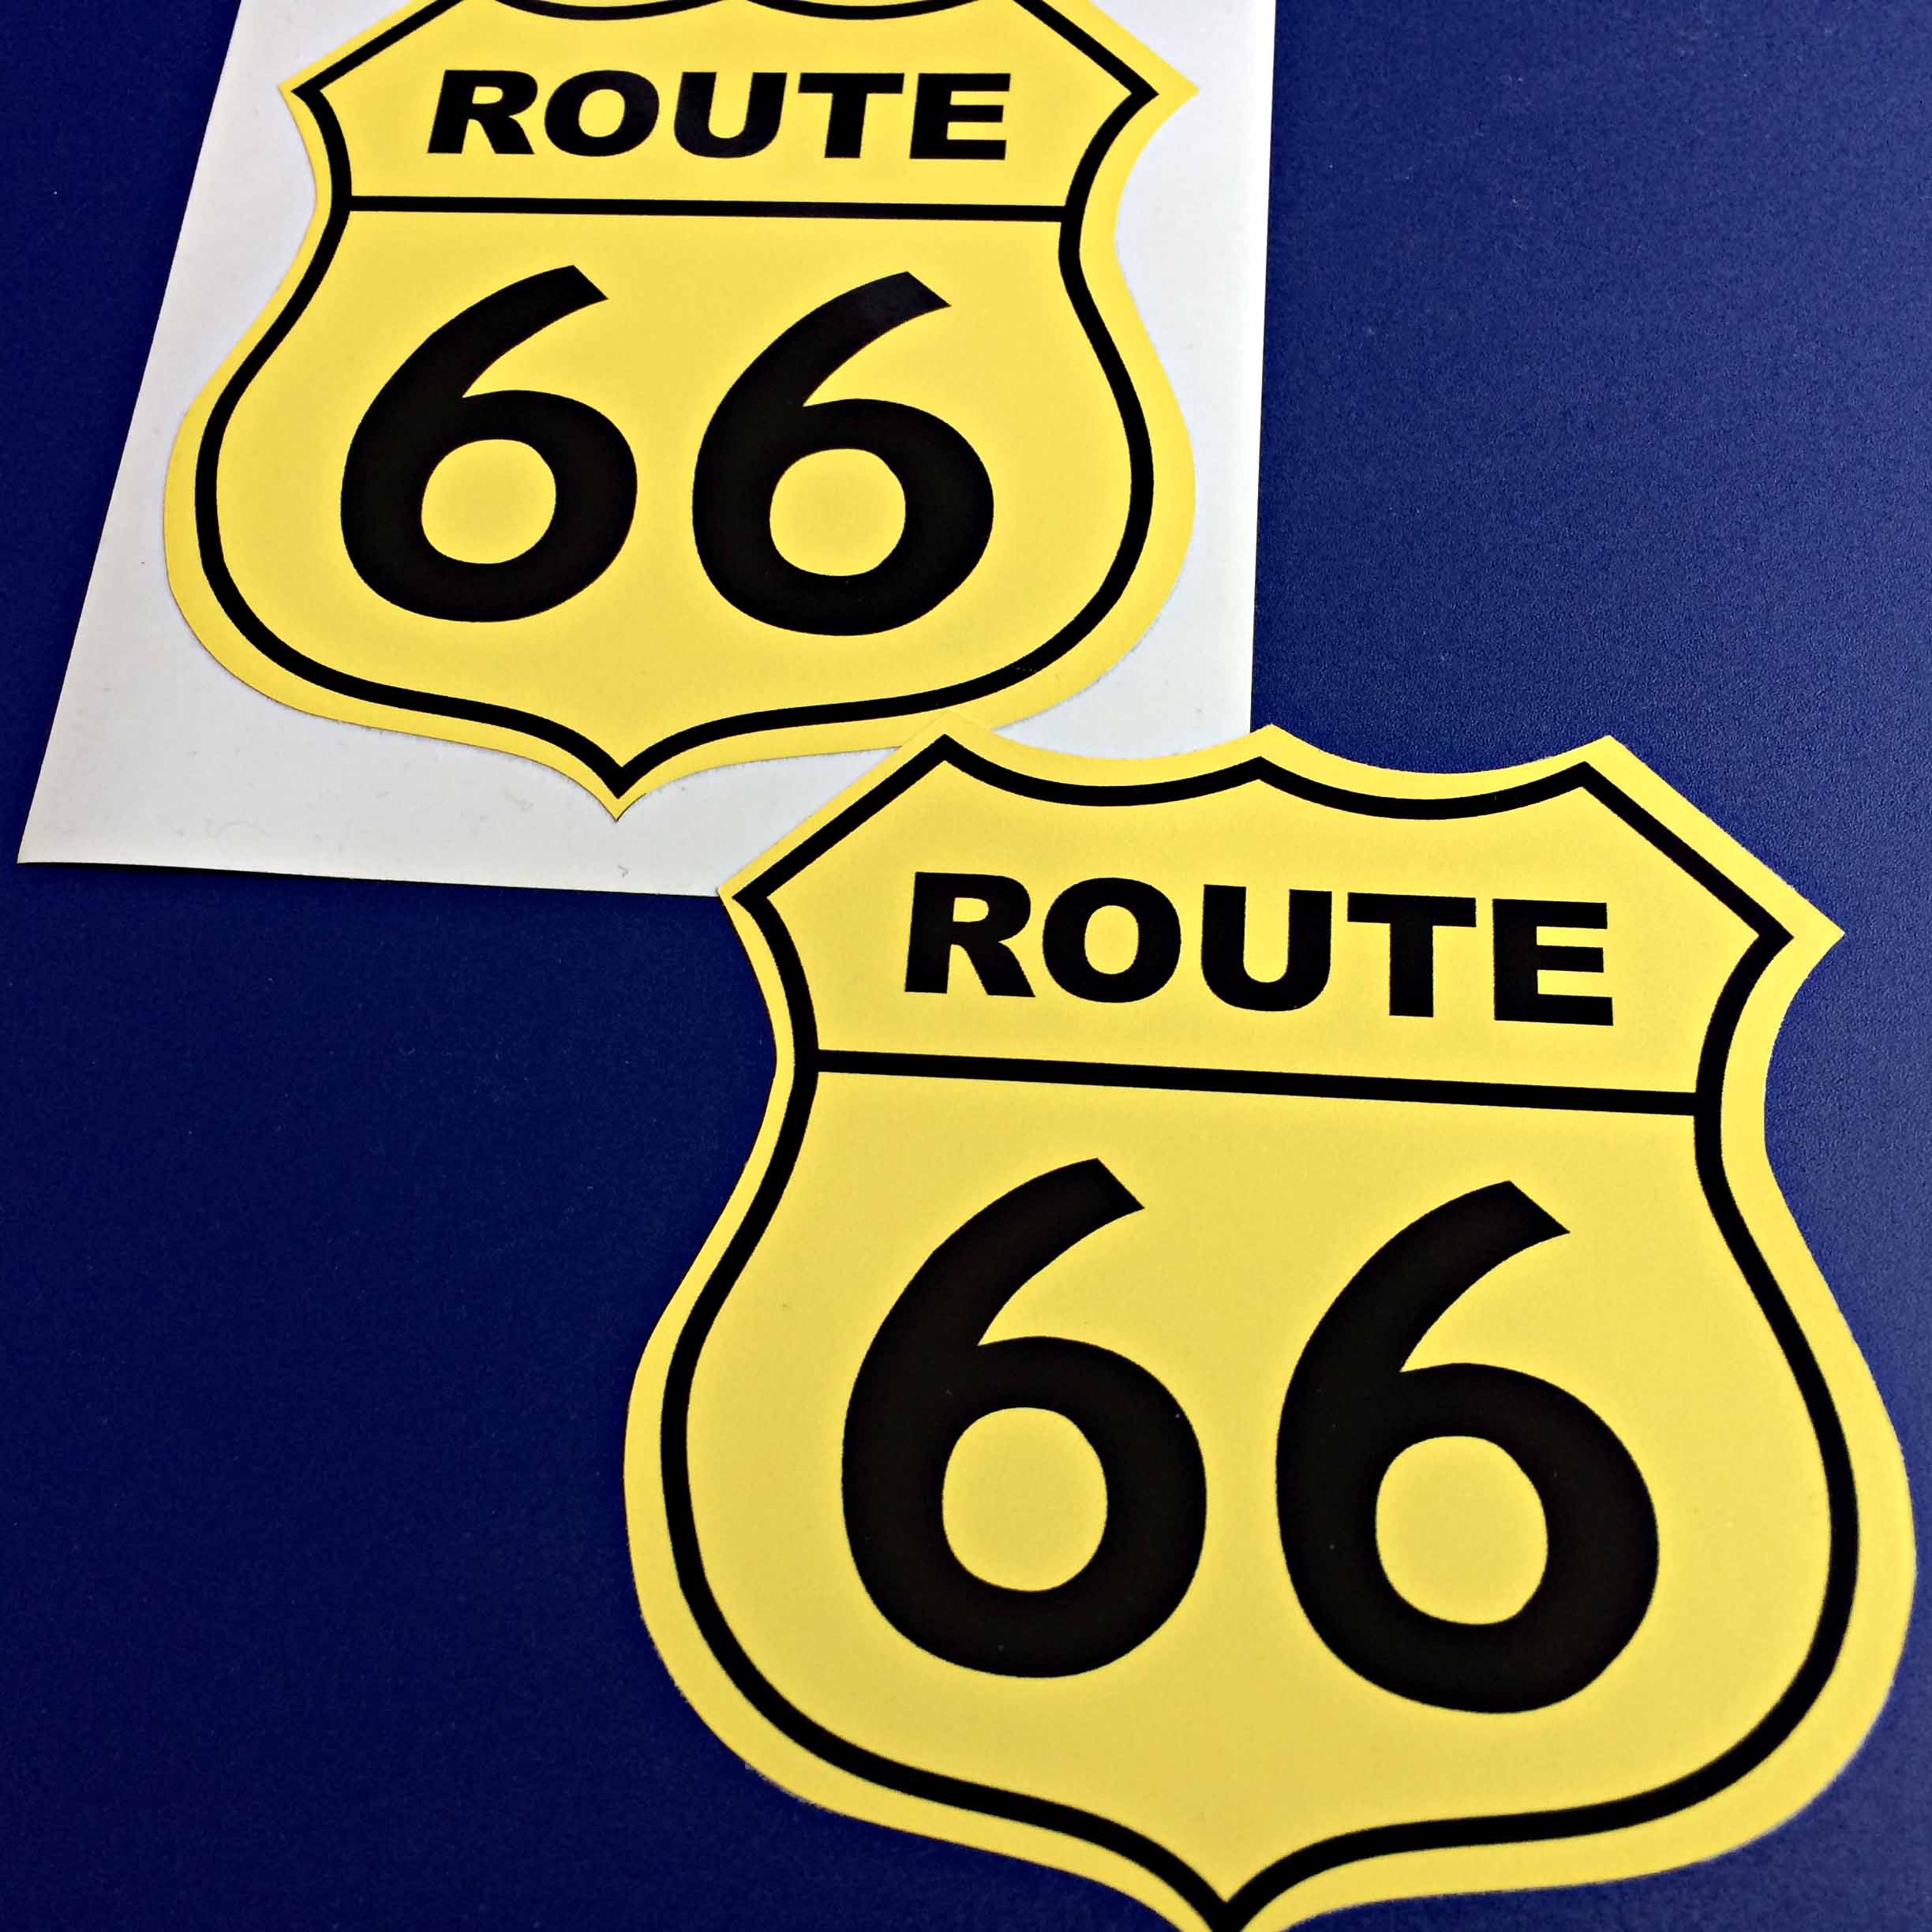 ROUTE 66 STICKERS. Route 66 in bold black lettering on a yellow Route 66 sign shaped sticker.